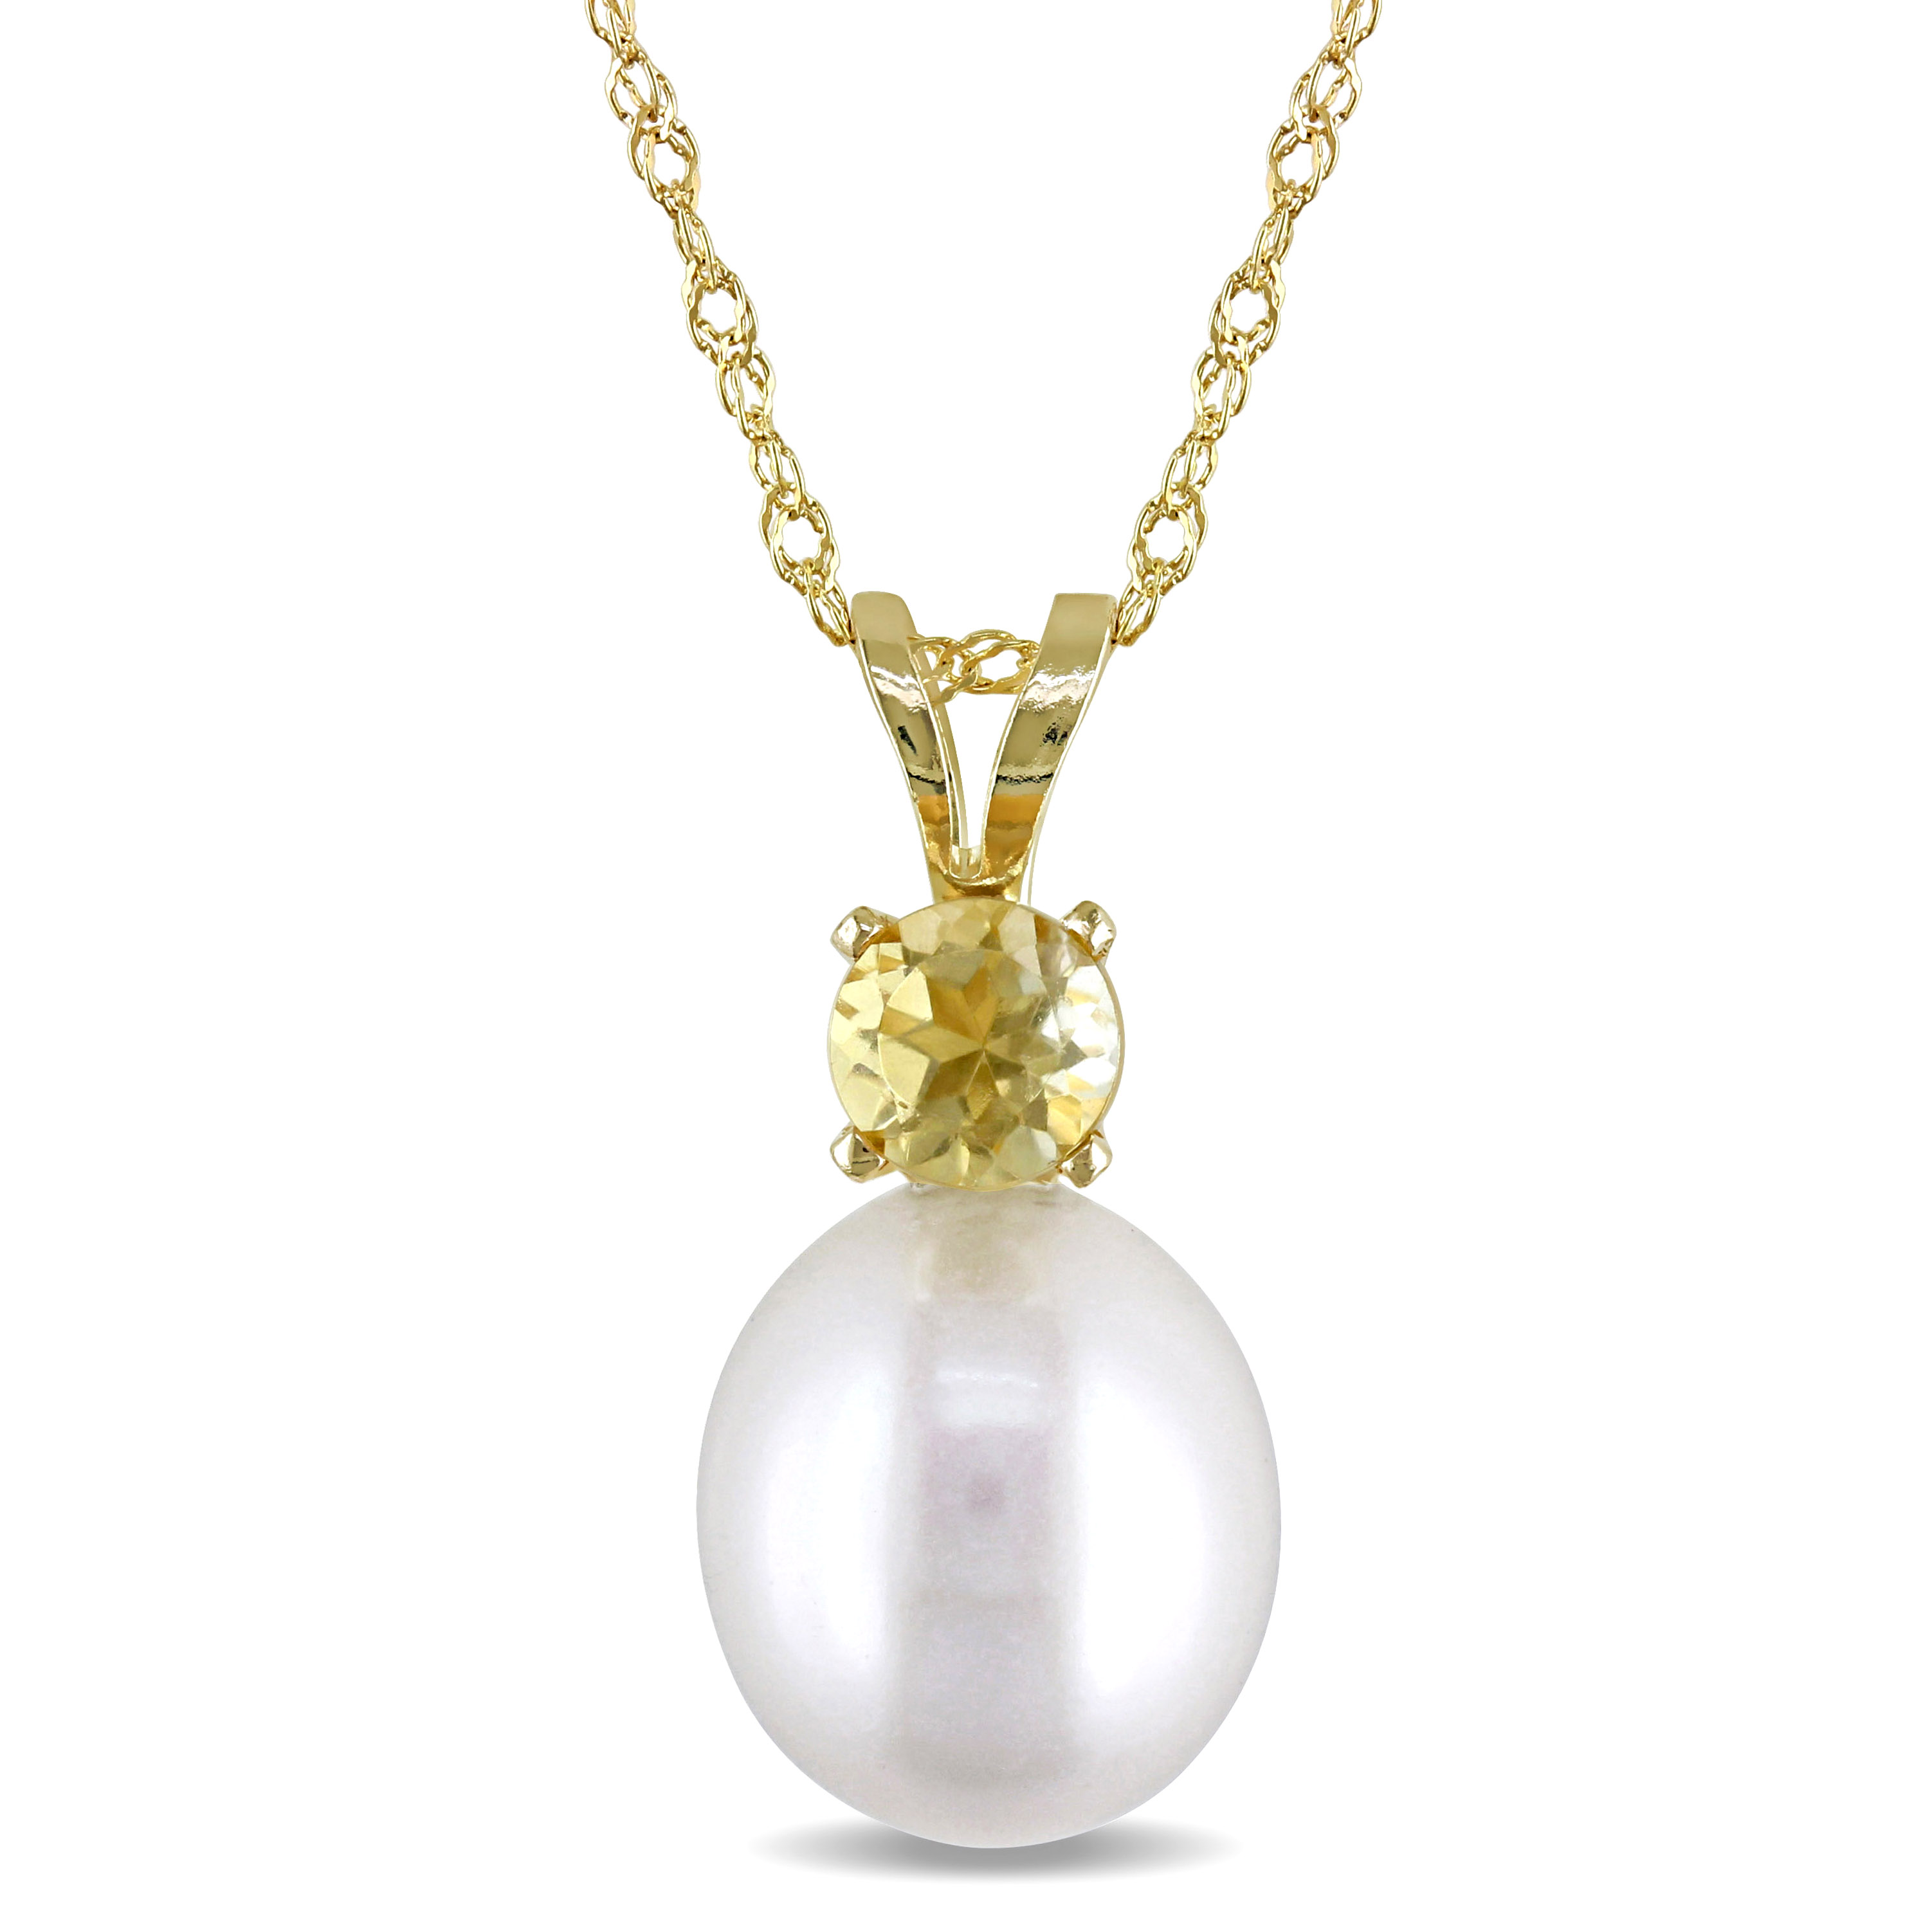 8 - 8.5 MM Cultured Freshwater Pearl and Citrine Pendant With Chain in 14k Yellow Gold